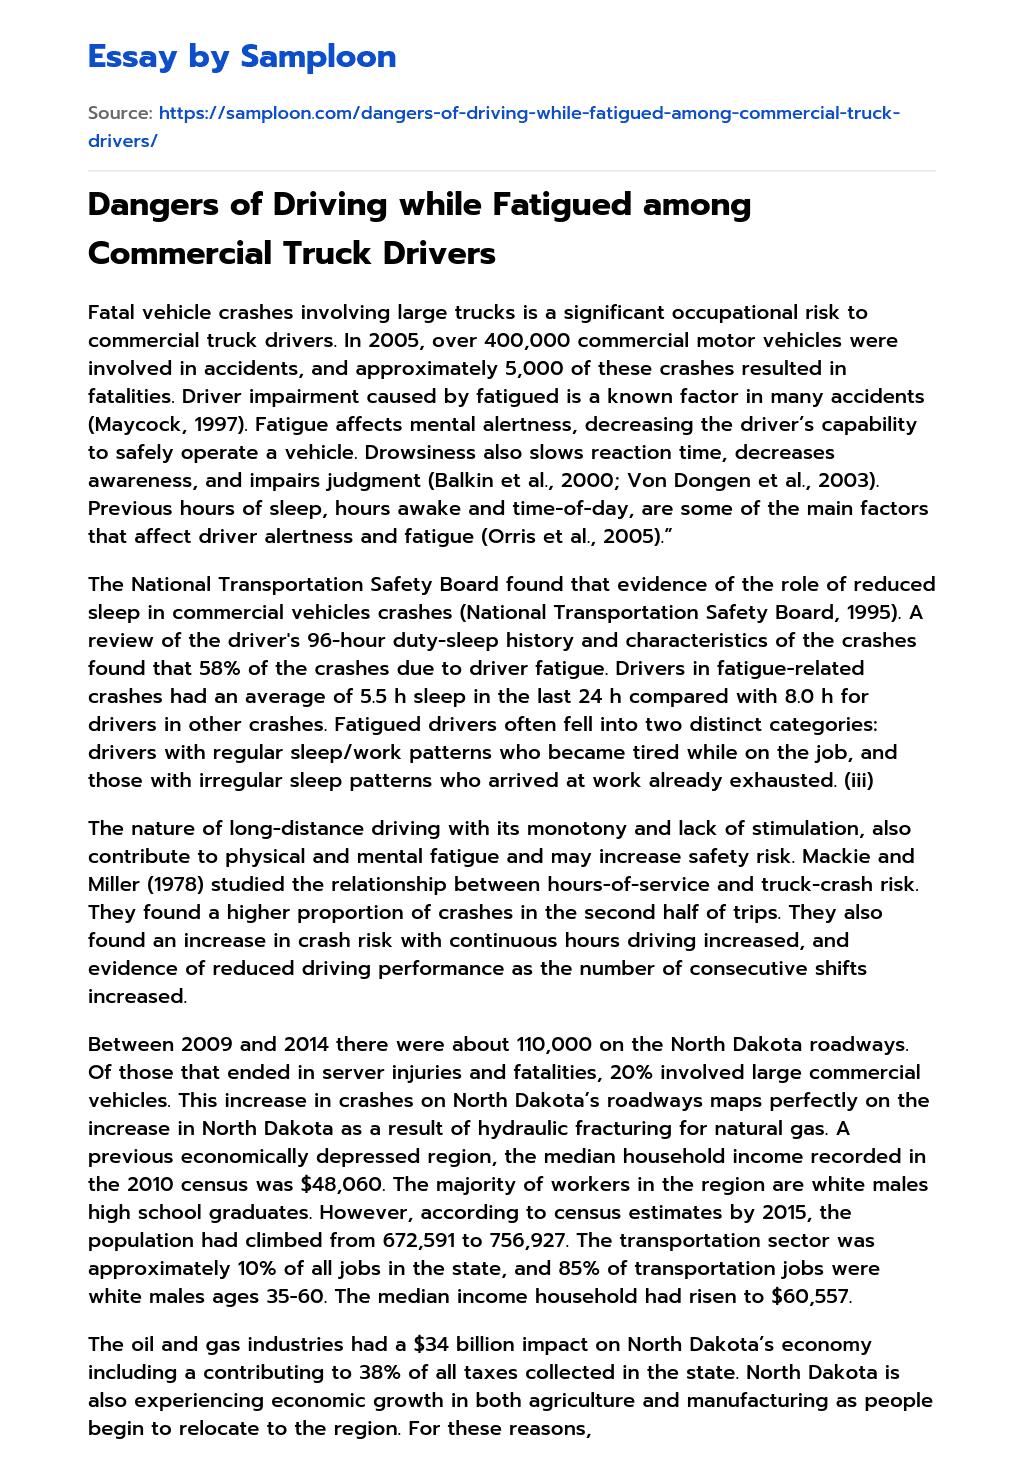 Dangers of Driving while Fatigued among Commercial Truck Drivers essay